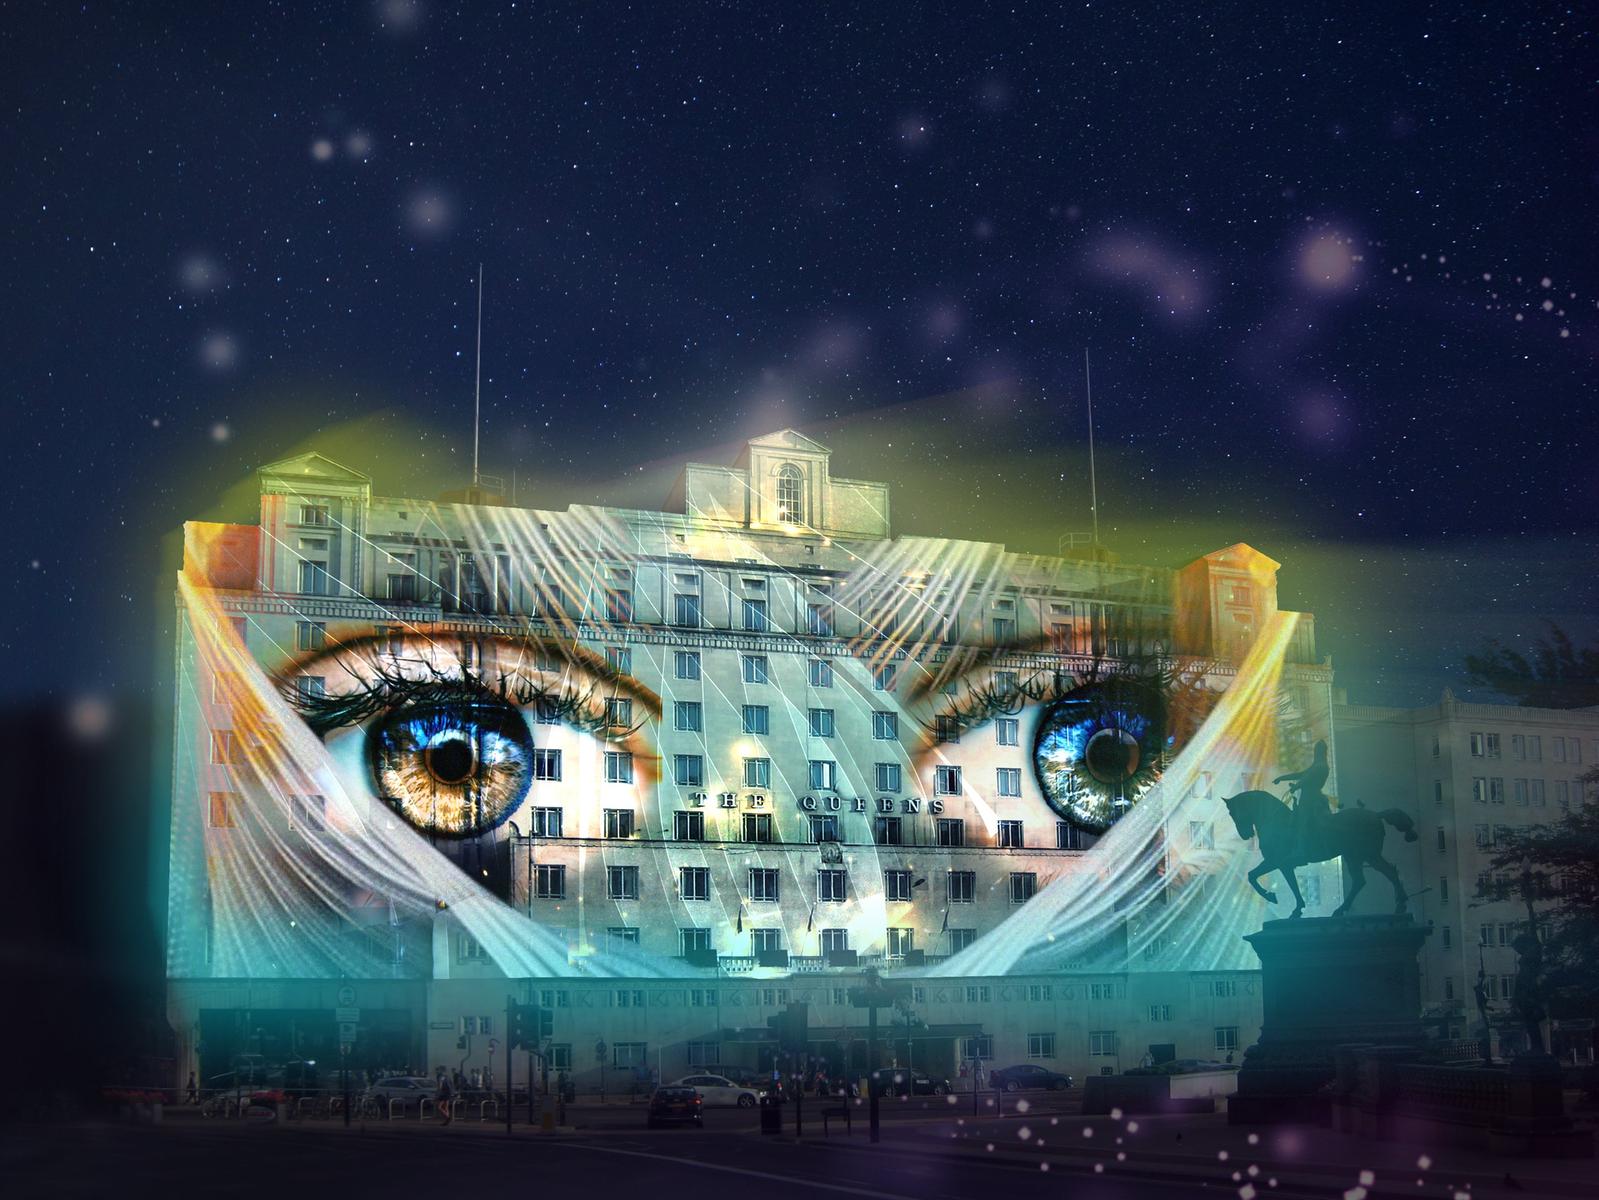 Projected onto the front of The Queens Hotel, The Vision will take audiences into dreams of two characters through their eyes as it is  often believed that eyes are also a mirror of the soul